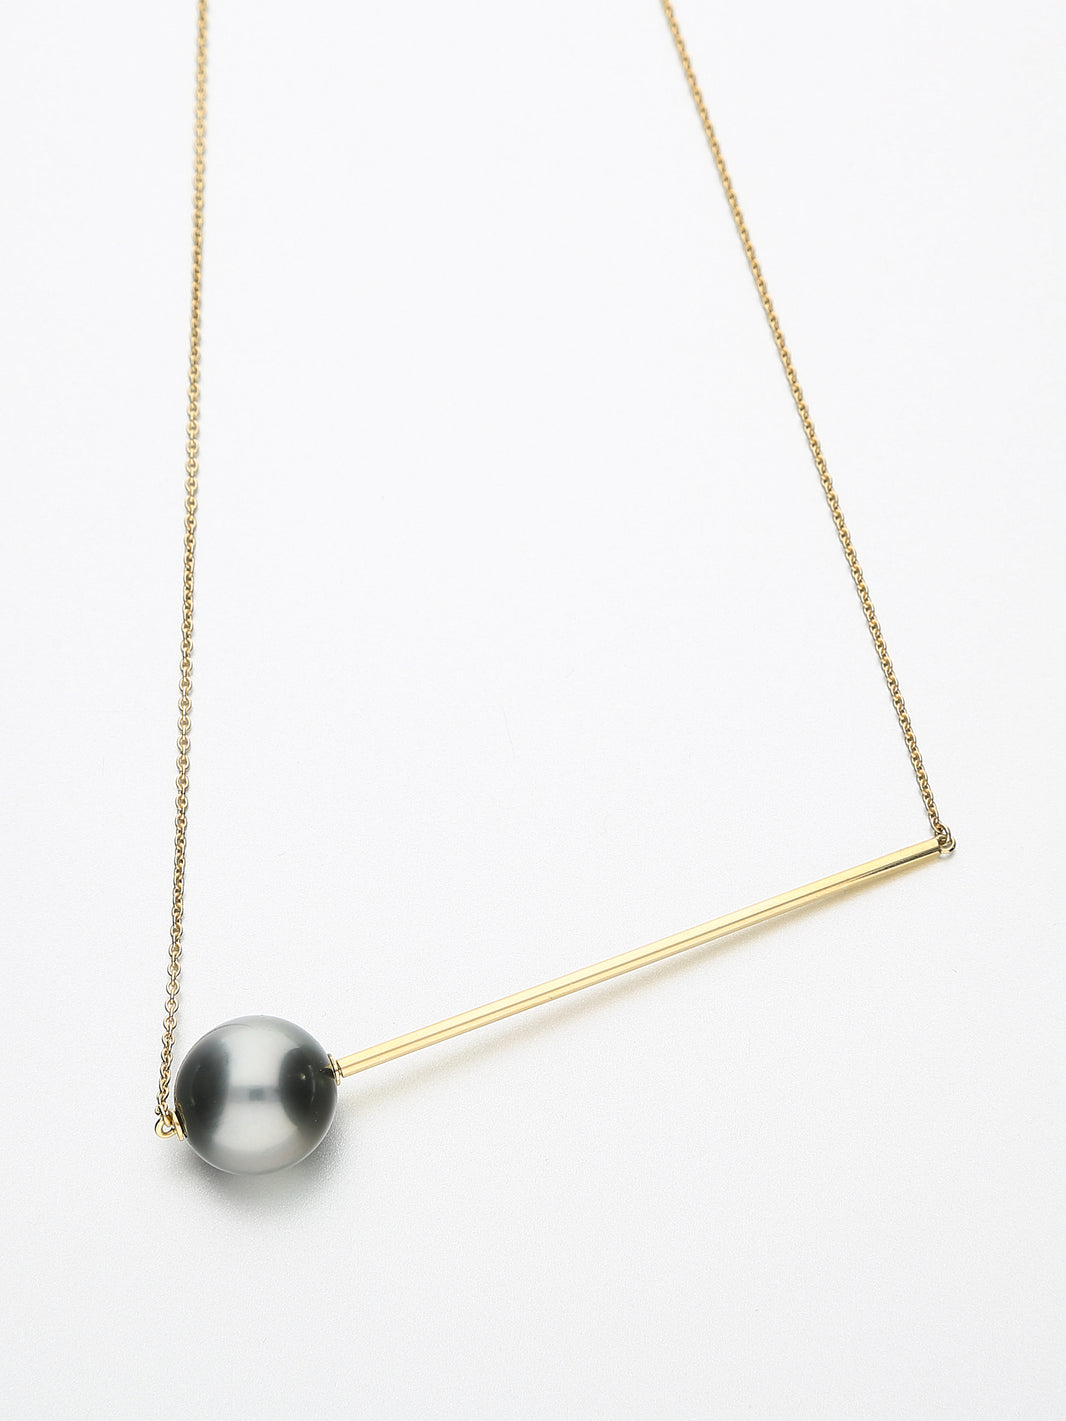 Abacus Pearl Necklace, Yellow gold with dark Tahitian pearl 13mm